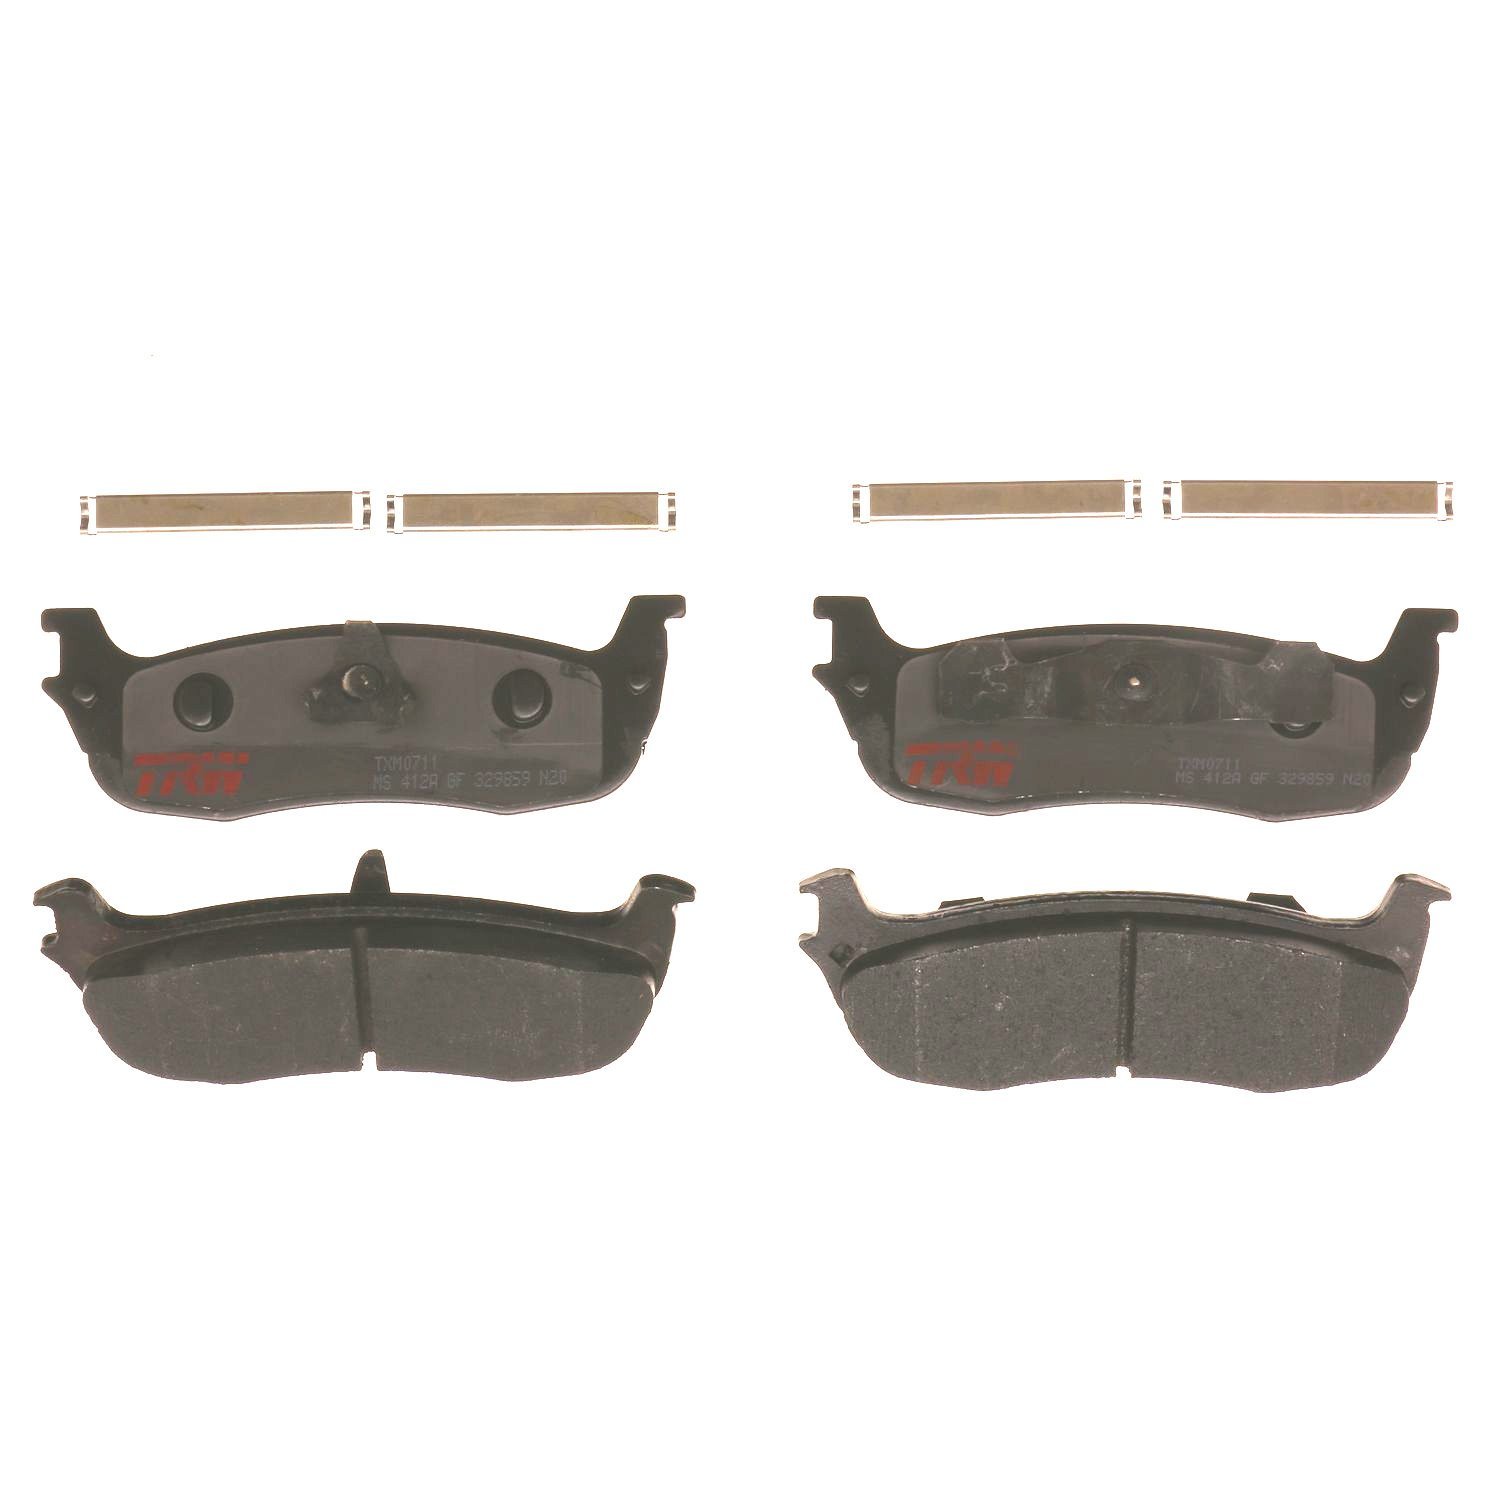 TXM0711 Ultra-Series Disc Brake Pad Set for Select Ford/Lincoln/Mazda/Mercury Models, Position: Front